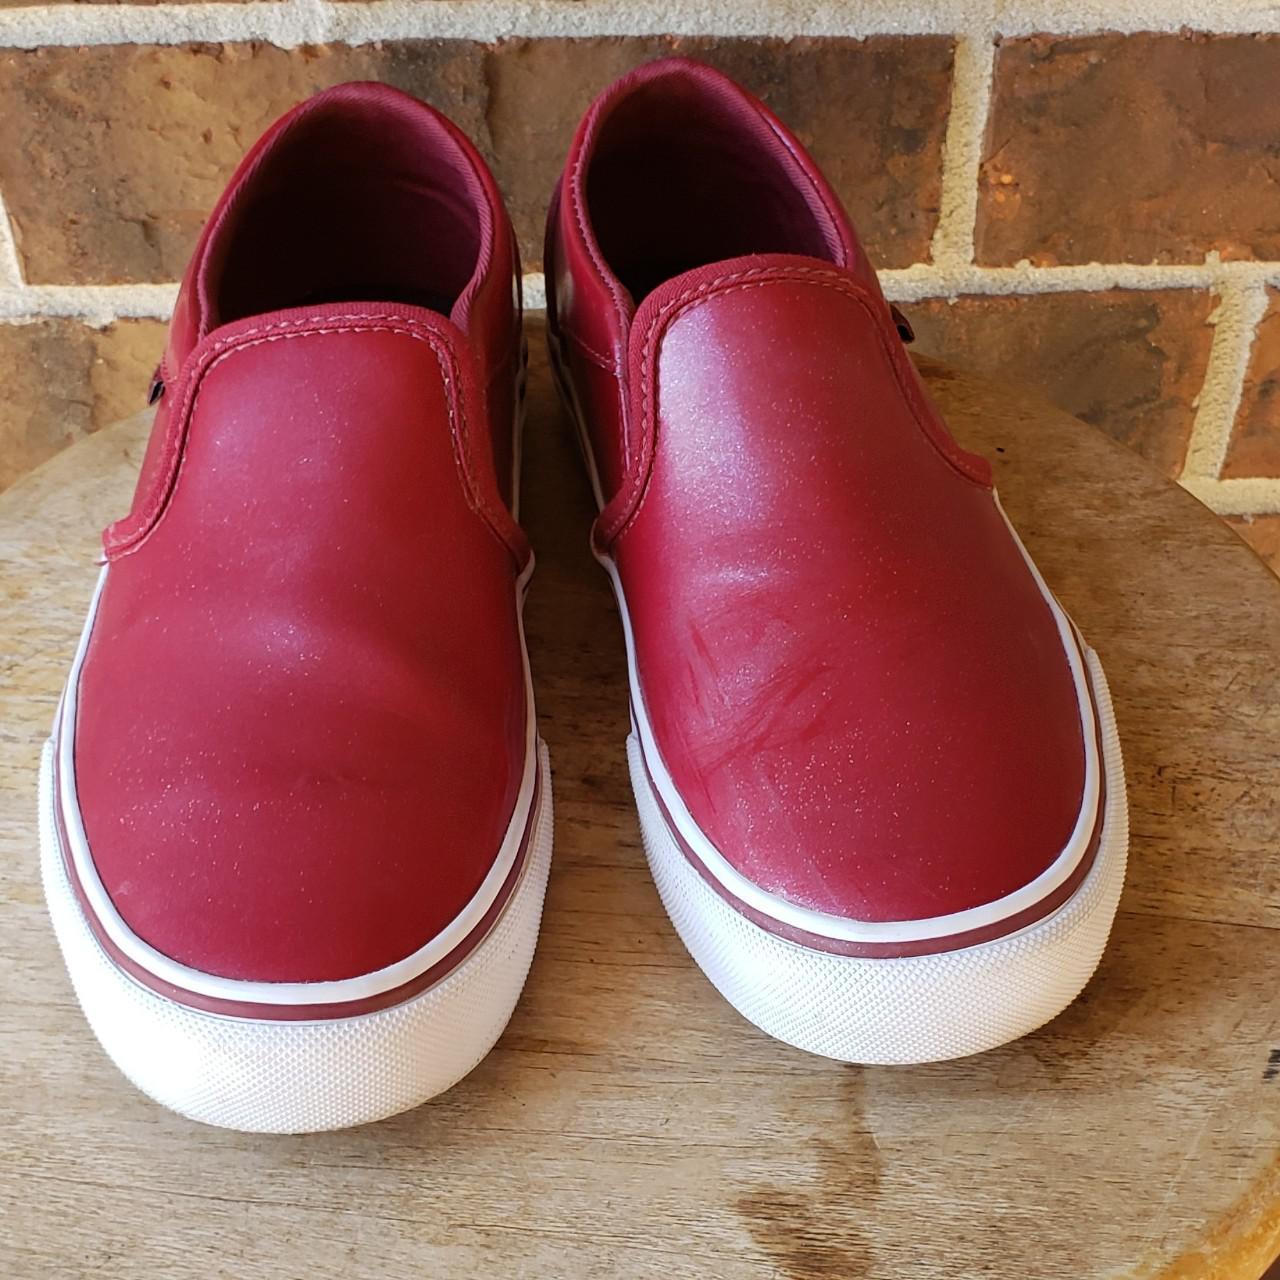 Vans Women's White and Red (2)